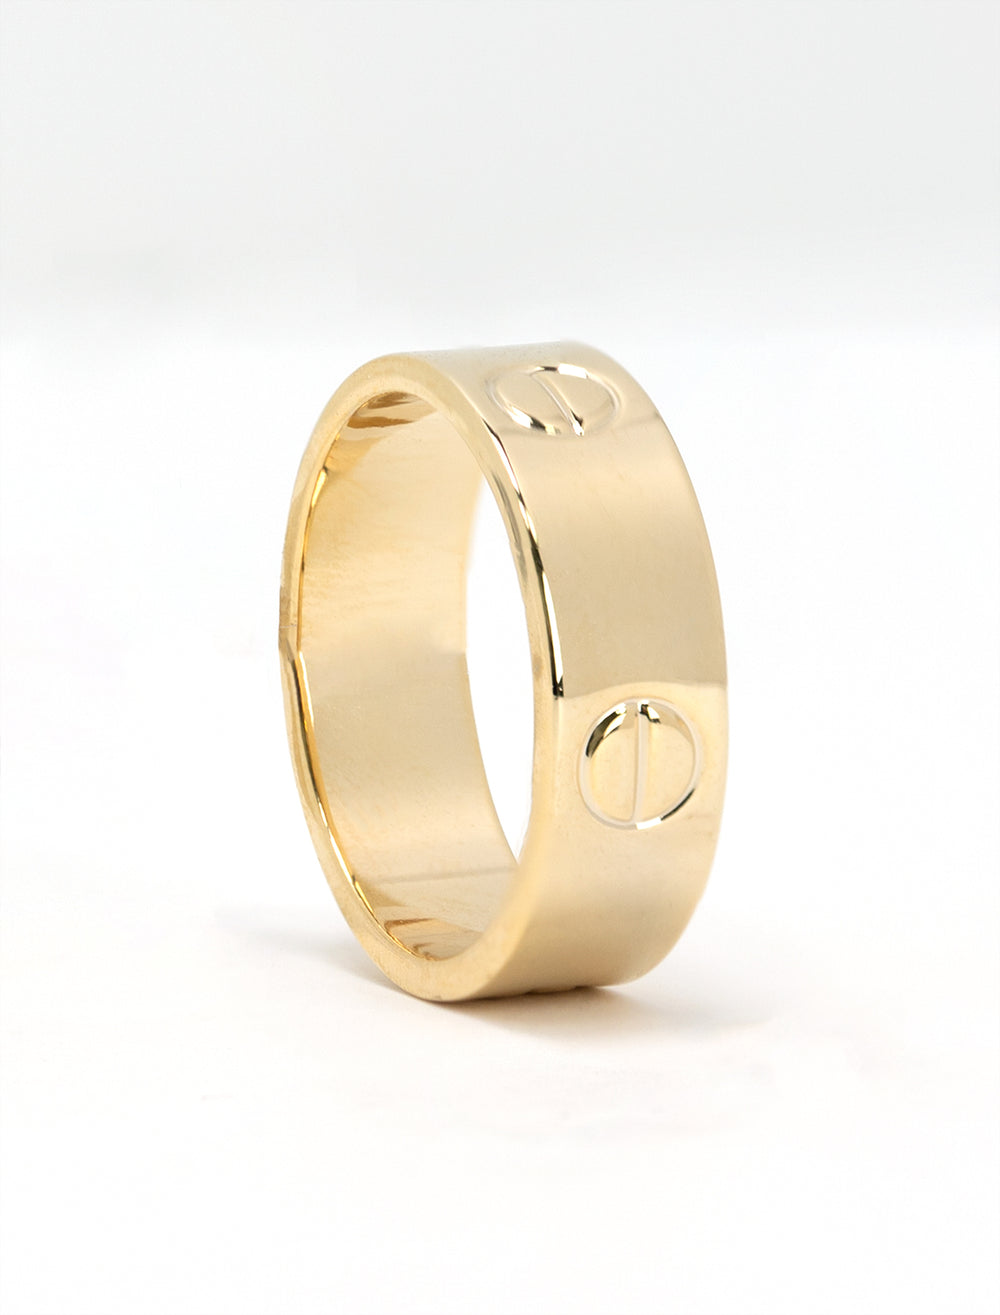 Close-up view of AV Max gold screw accent ring